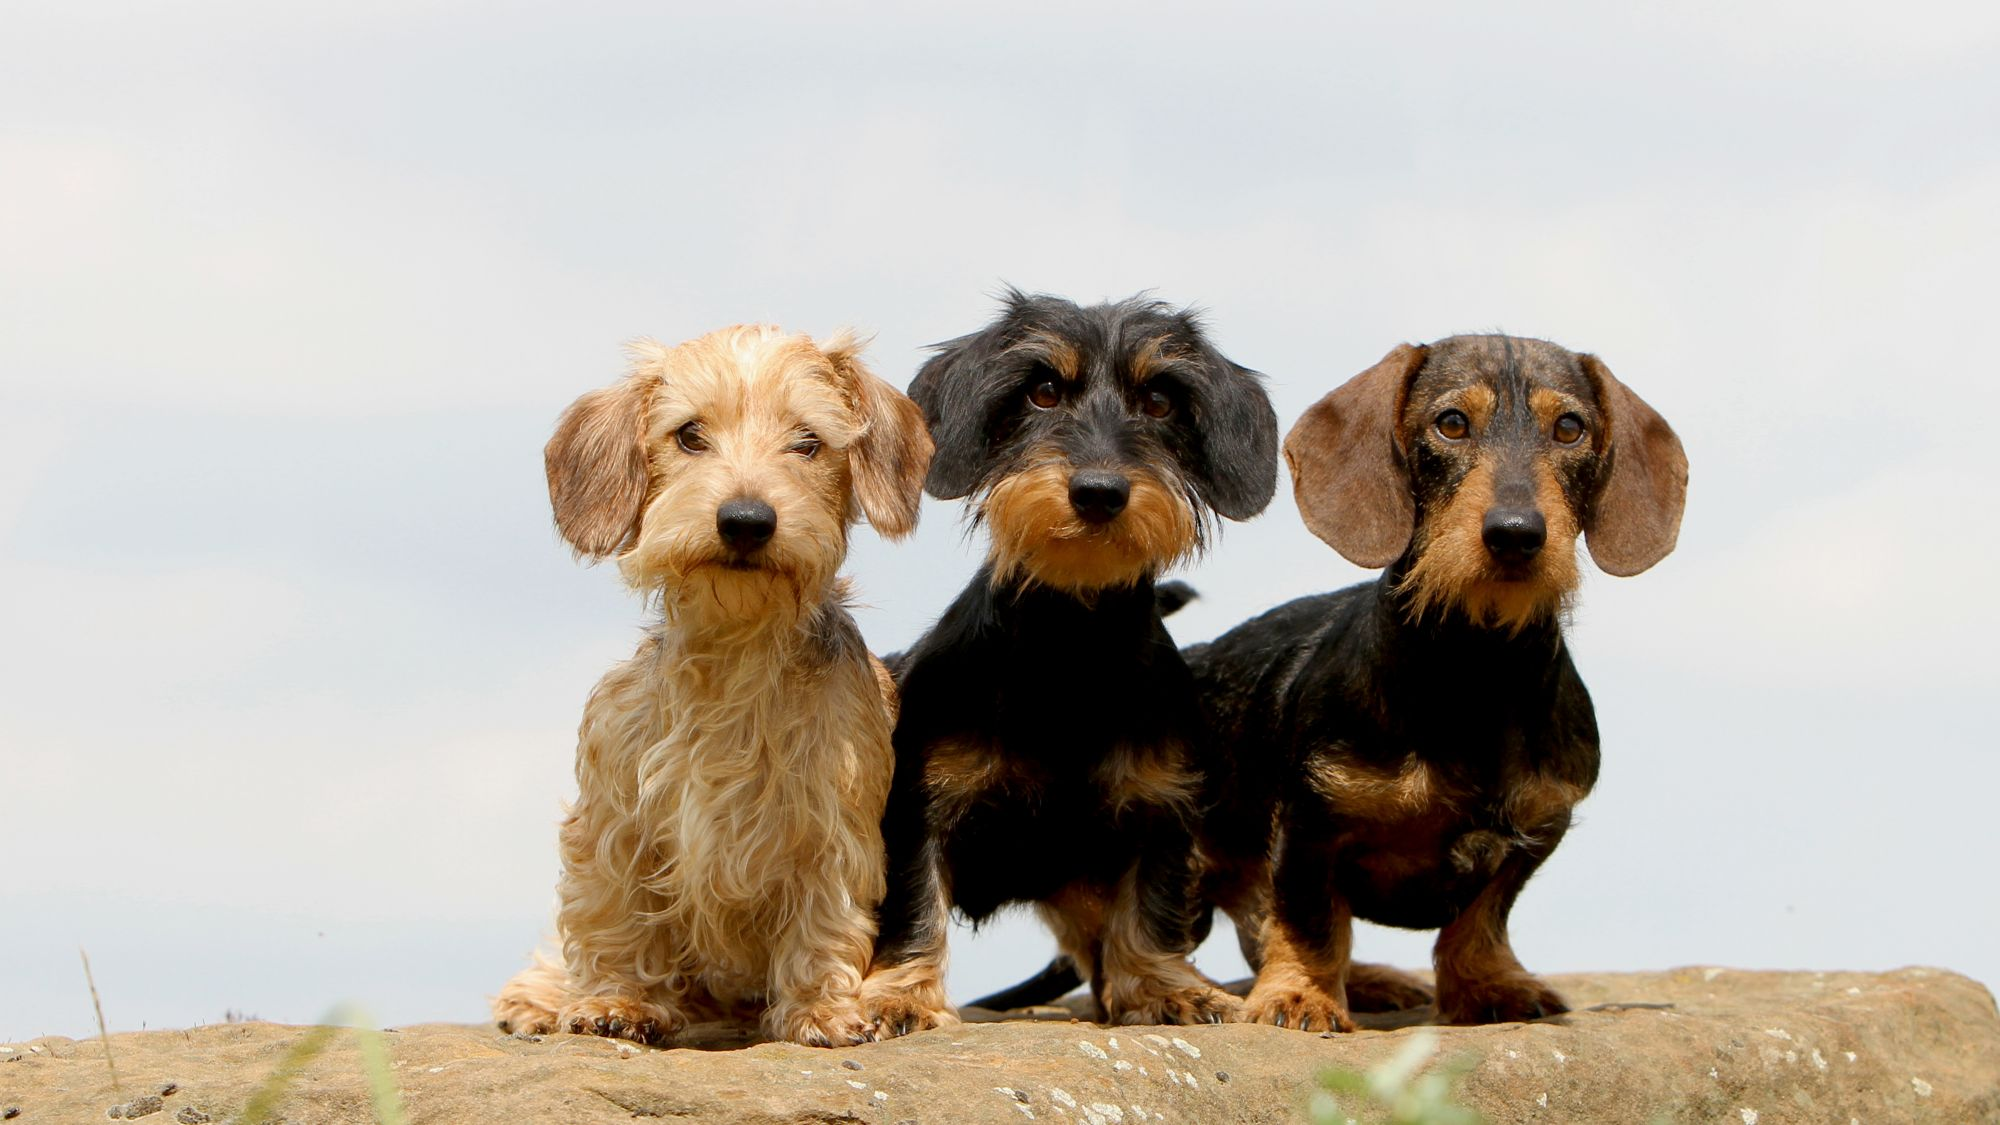 Three Dachshunds standing on rocky outcrop